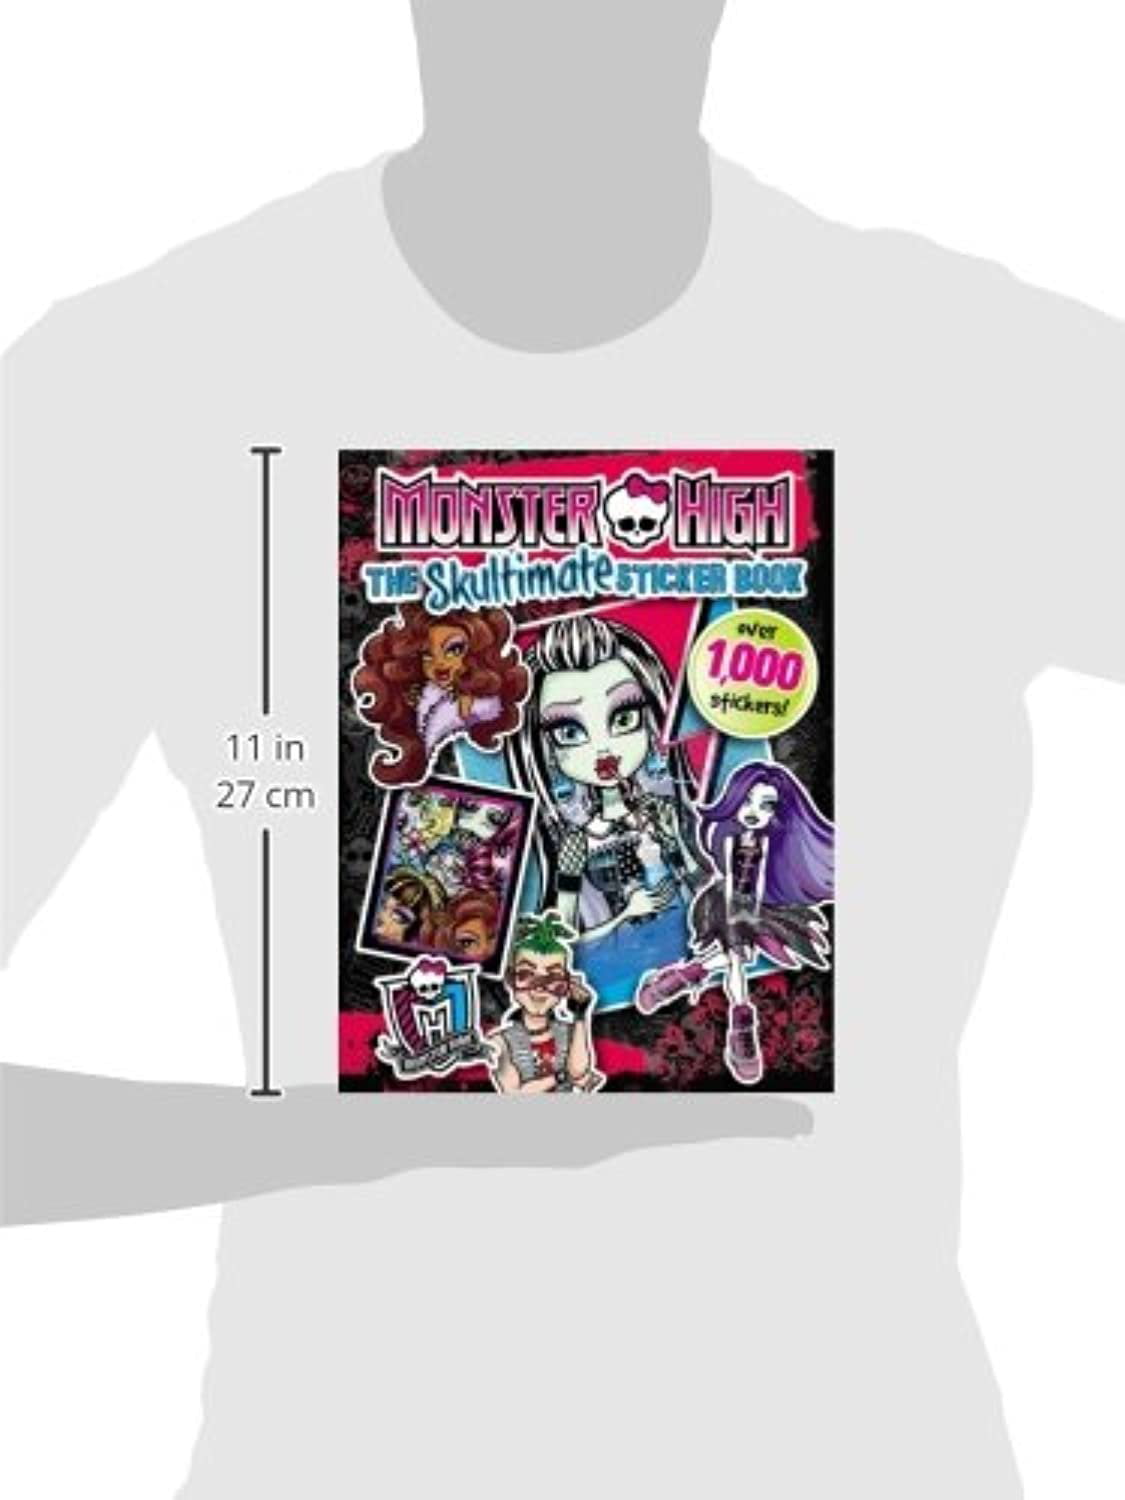 Monster High Collectible Sticker Album With 28 Stickers Featuring Characters